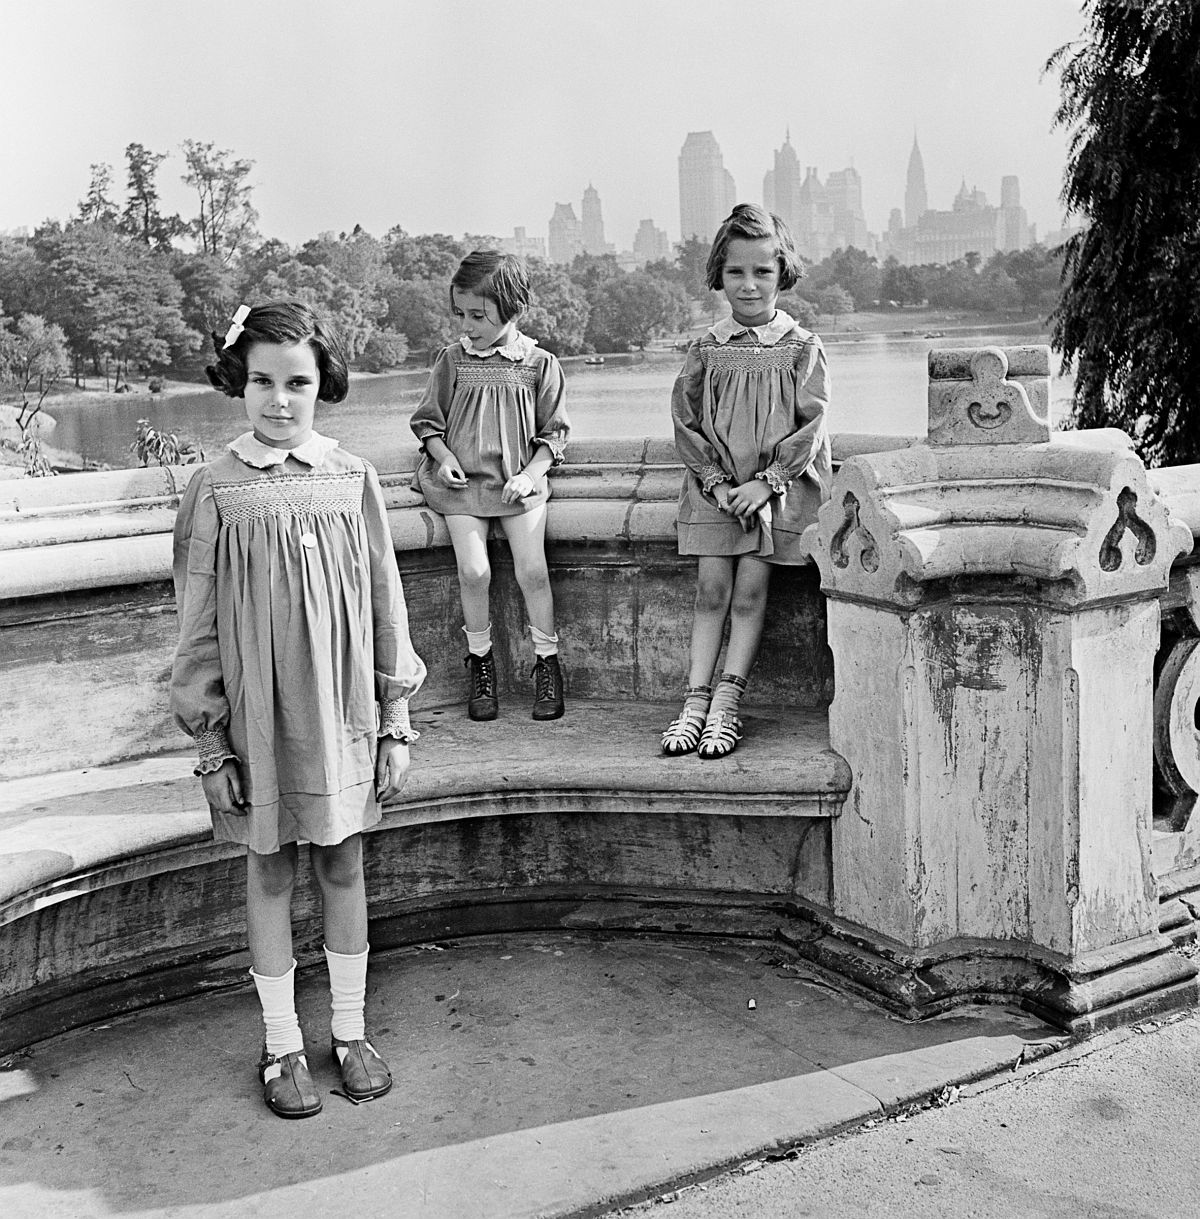 Roman Vishniac, [Sisters Marion, Renate, and Karen Gumprecht, refugees assisted by the National Refugee Service (NRS) and Hebrew Immigrant Aid Society (HIAS), shortly after their arrival in the United States, Central Park, New York], 1941. Ink-jet print. © Mara Vishniac Kohn, courtesy International Center of Photography. 